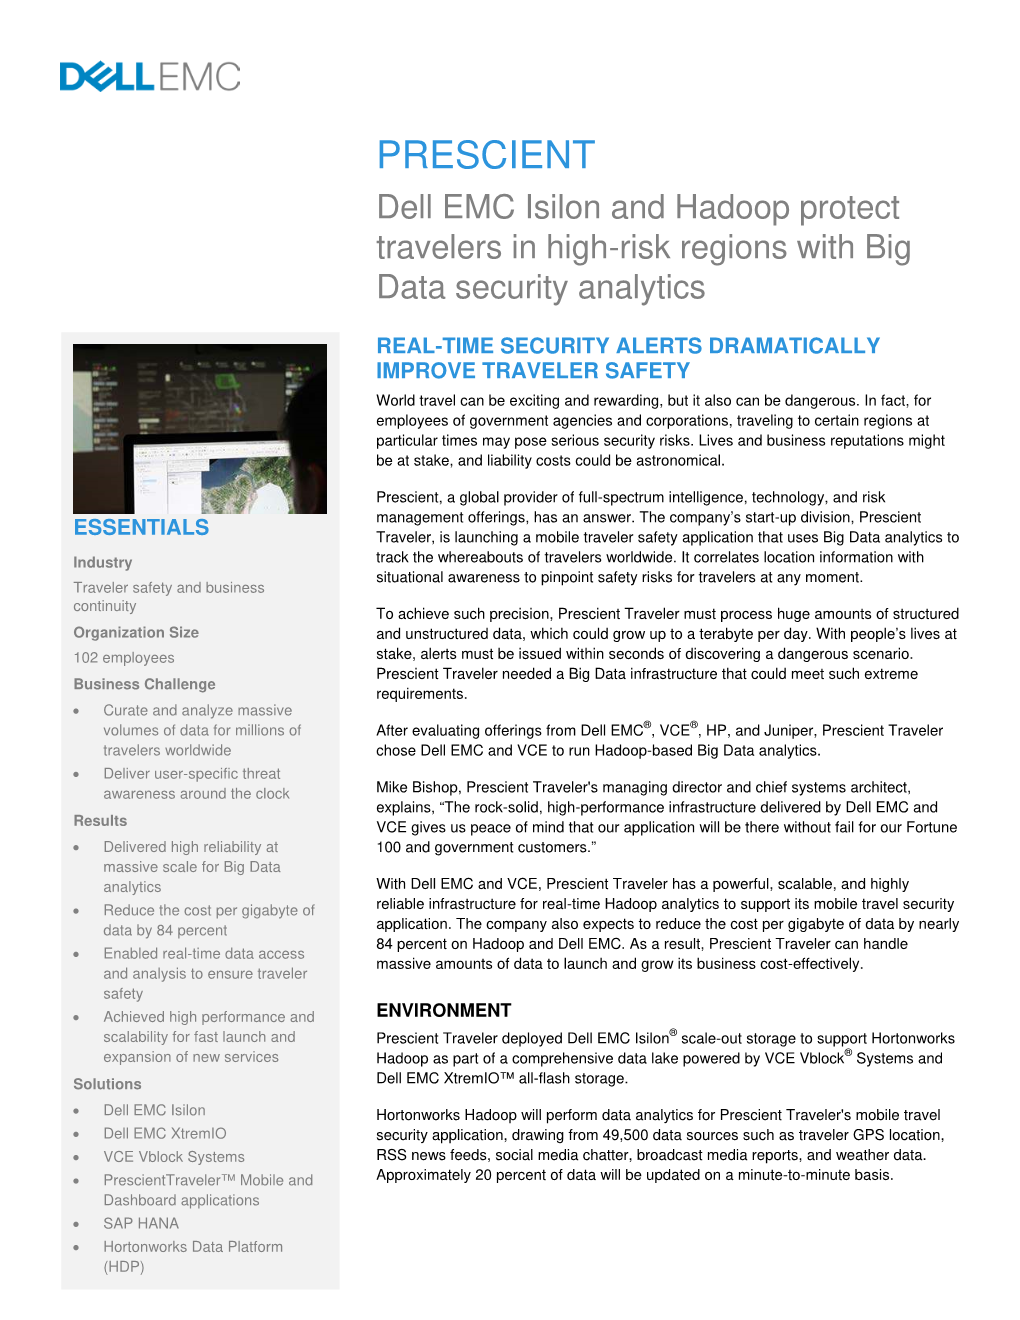 PRESCIENT Dell EMC Isilon and Hadoop Protect Travelers in High-Risk Regions with Big Data Security Analytics